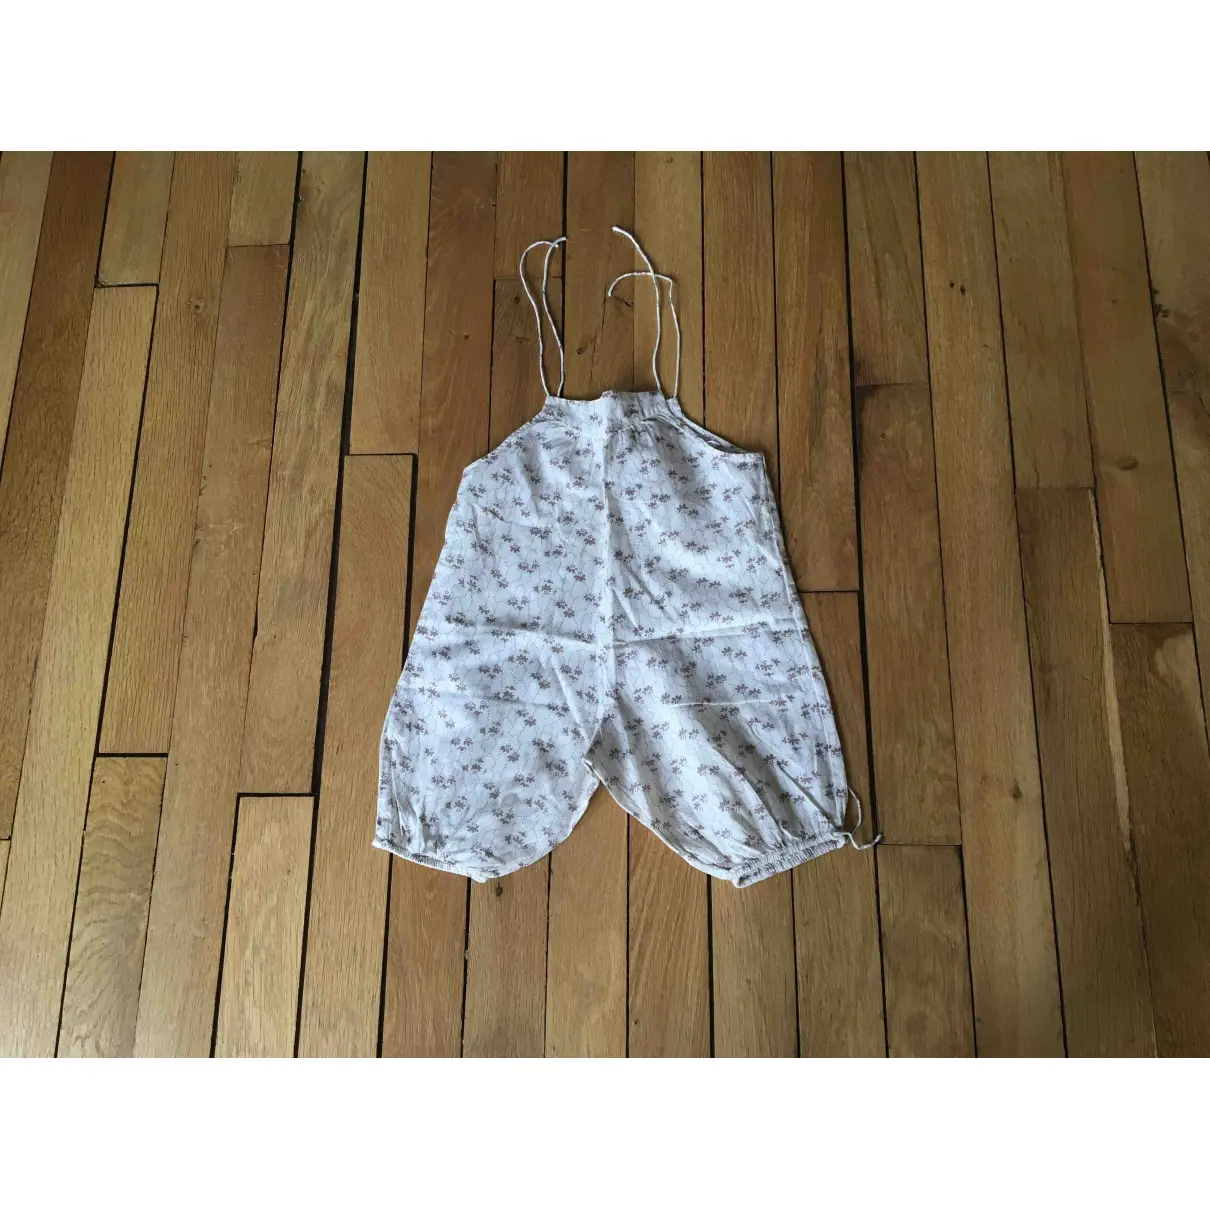 Bonpoint Outfit for sale